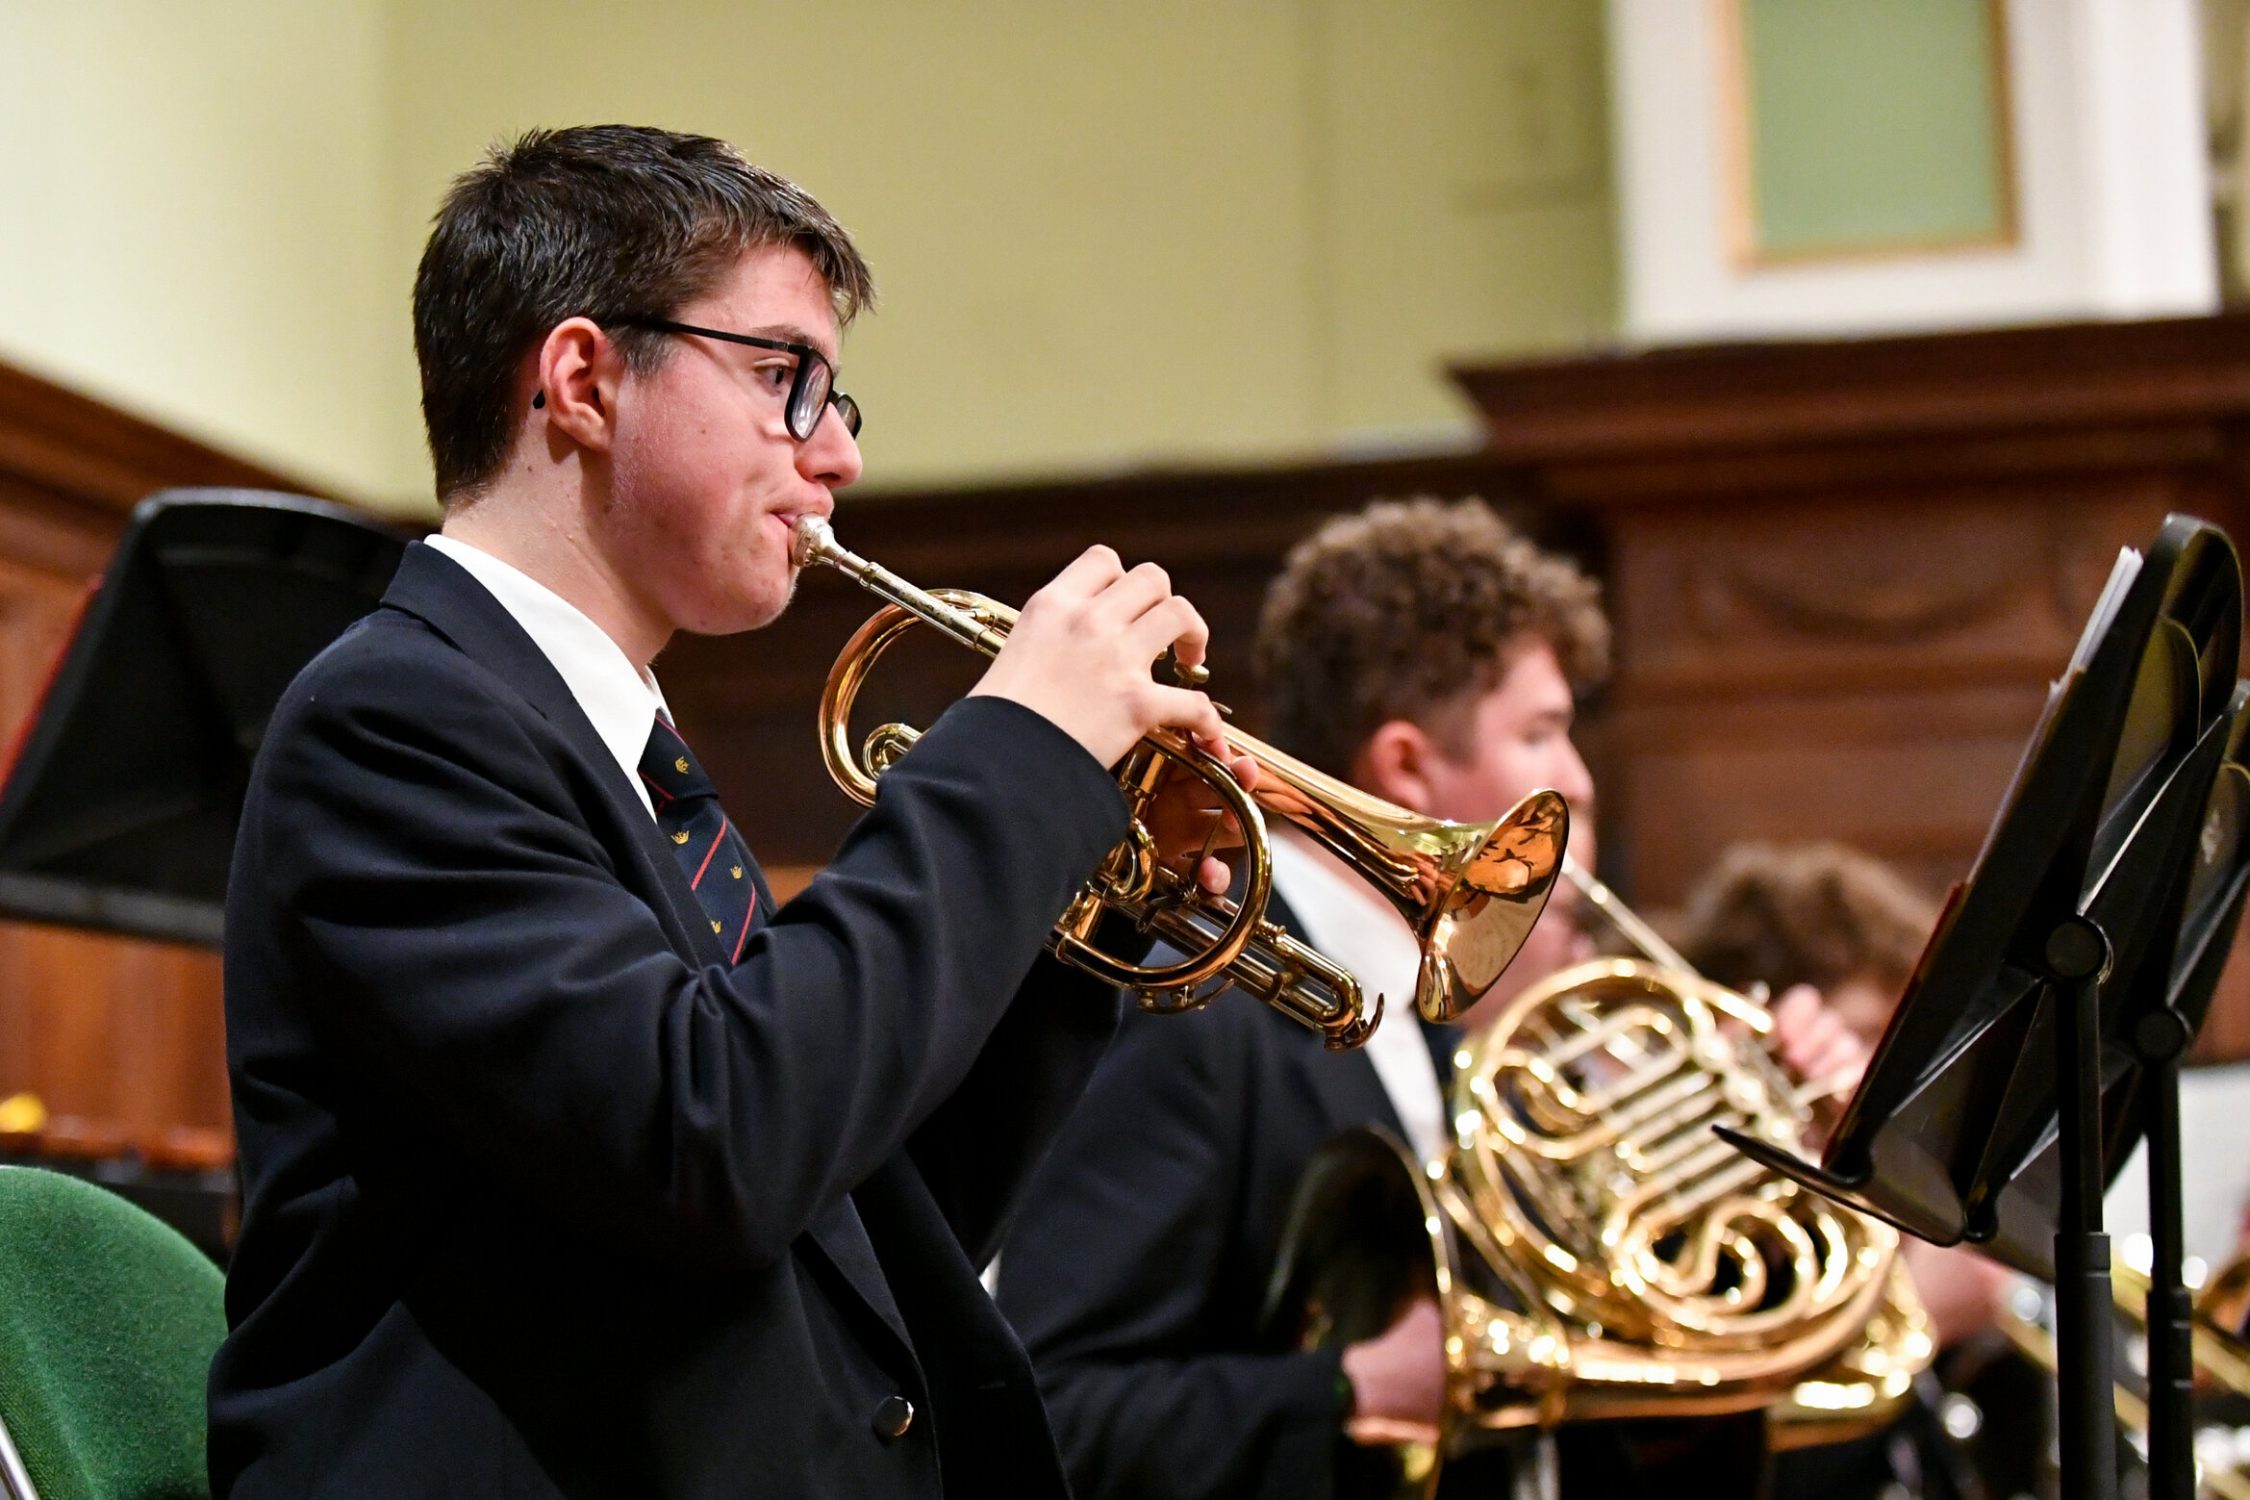 A week of Music Concerts at RGS